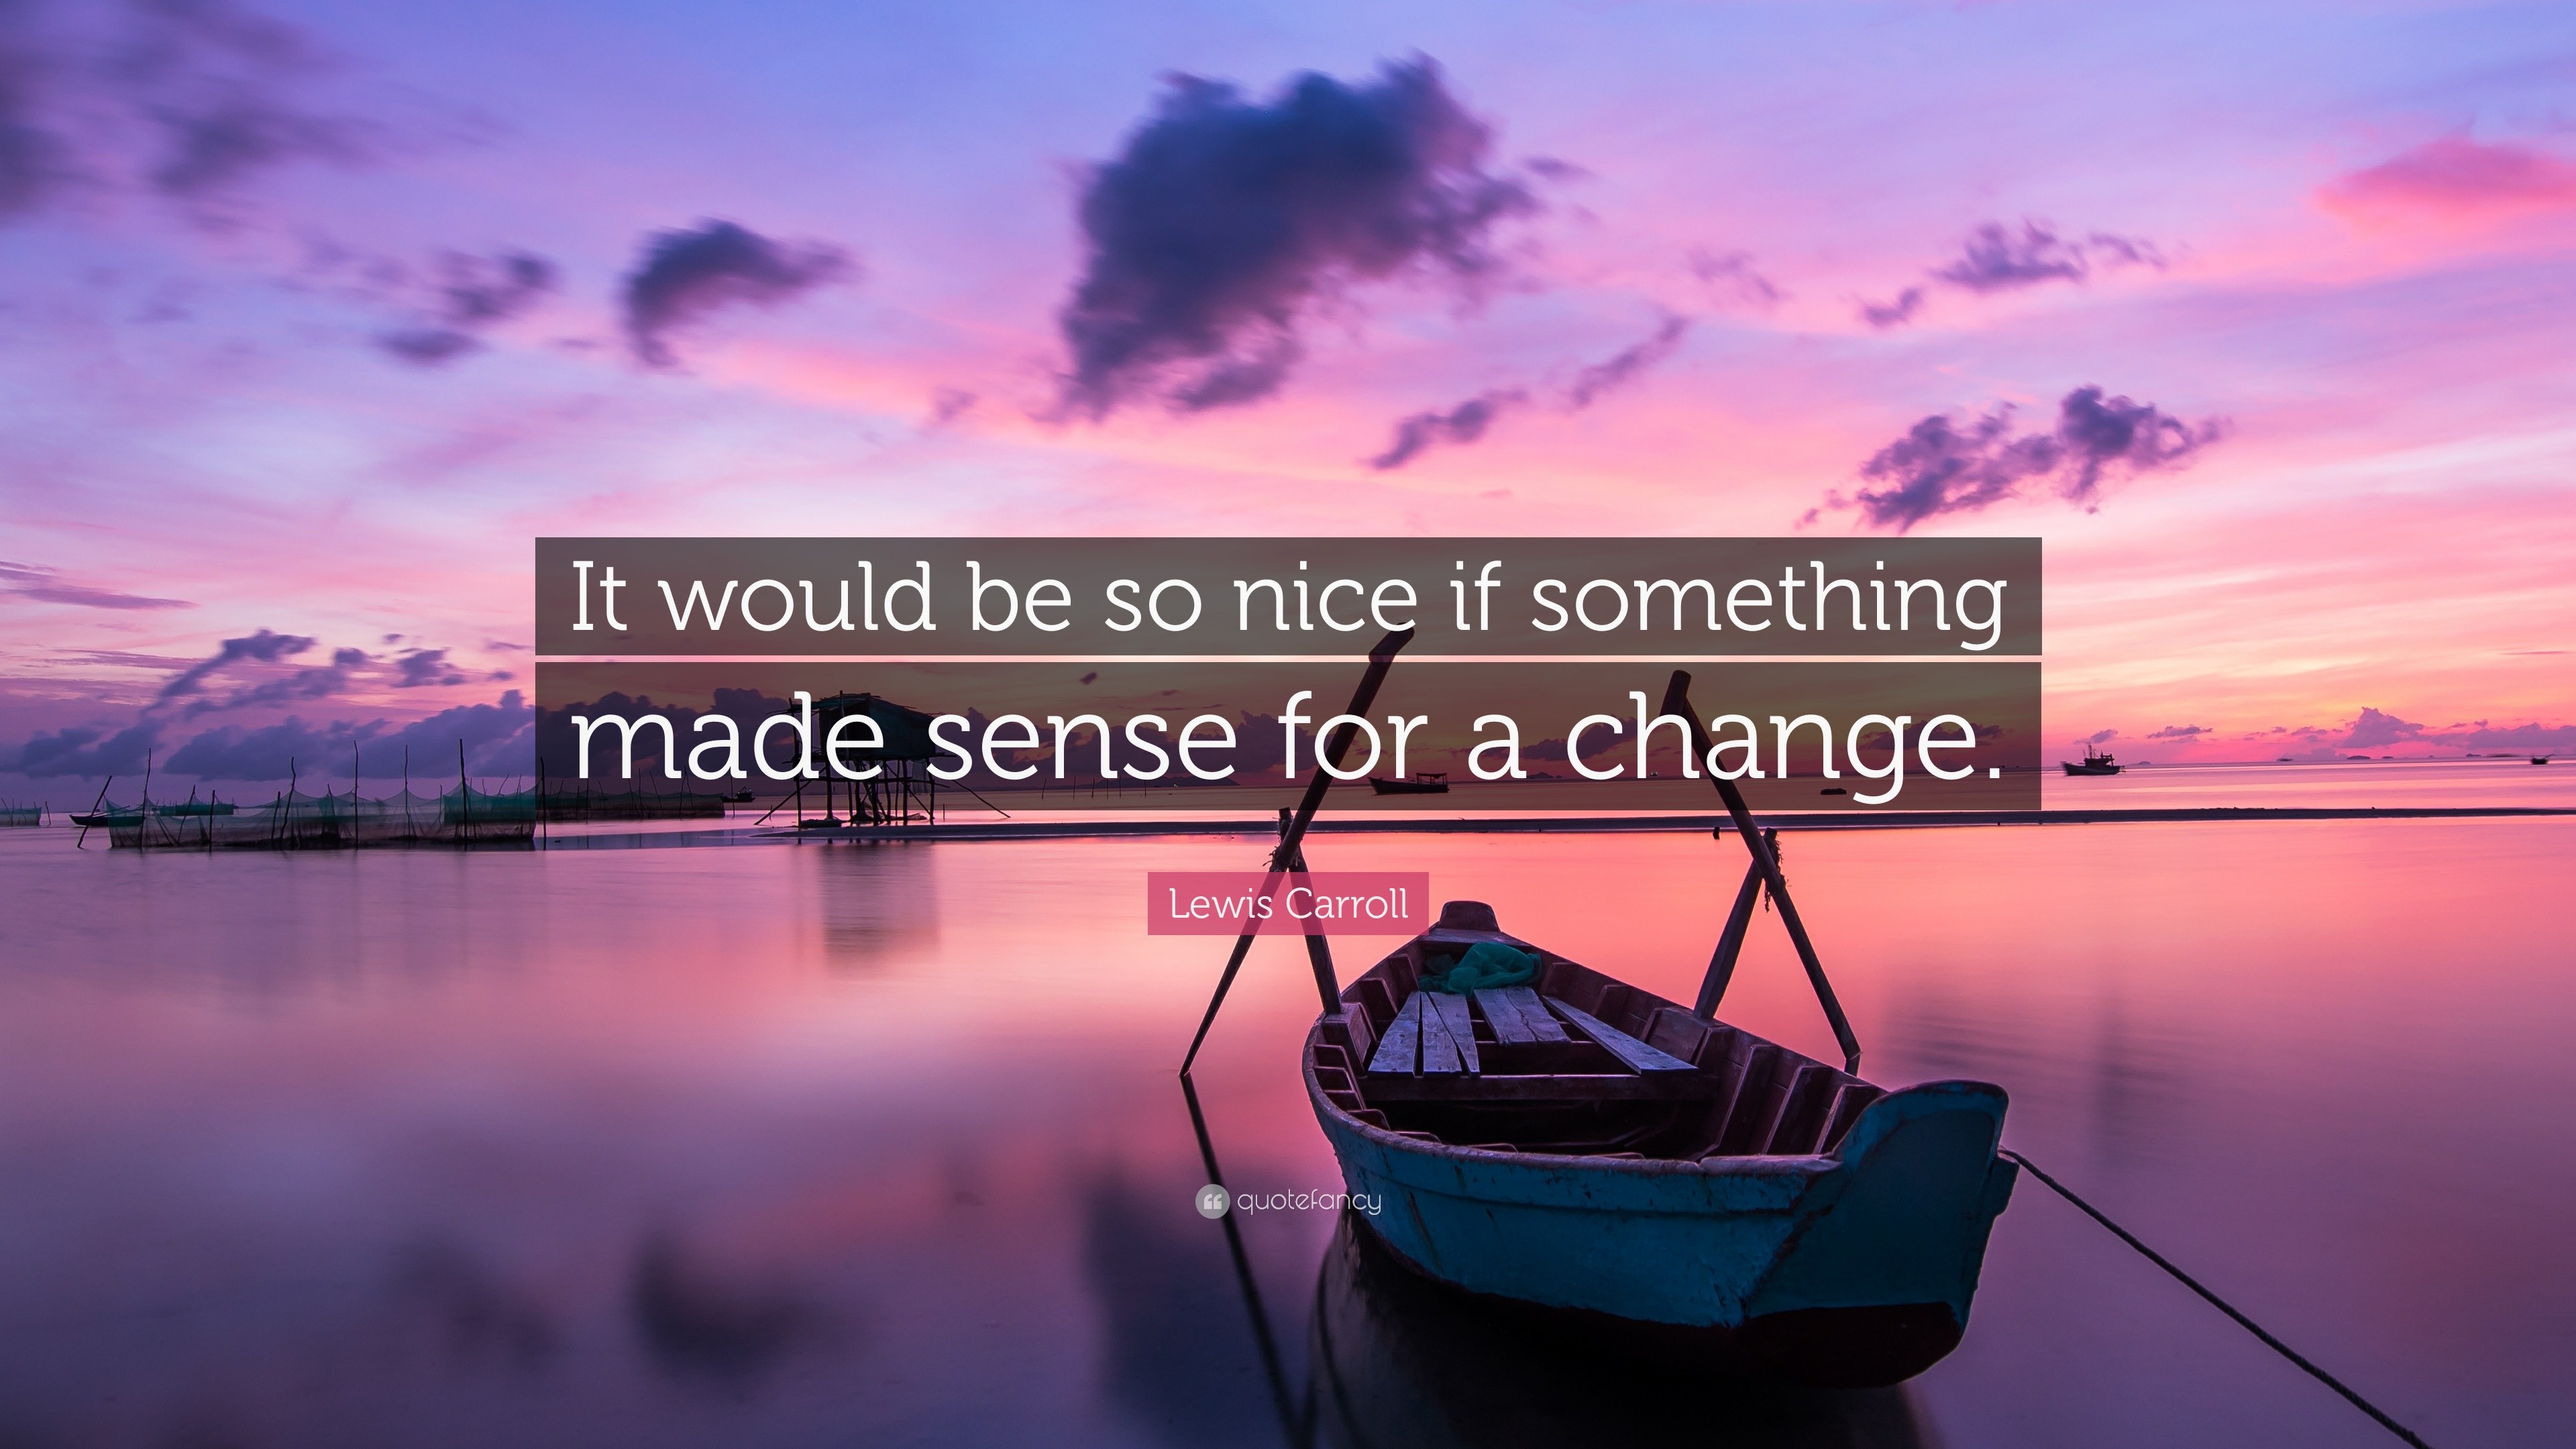 lewis carroll quote: "it would be so nice if something made